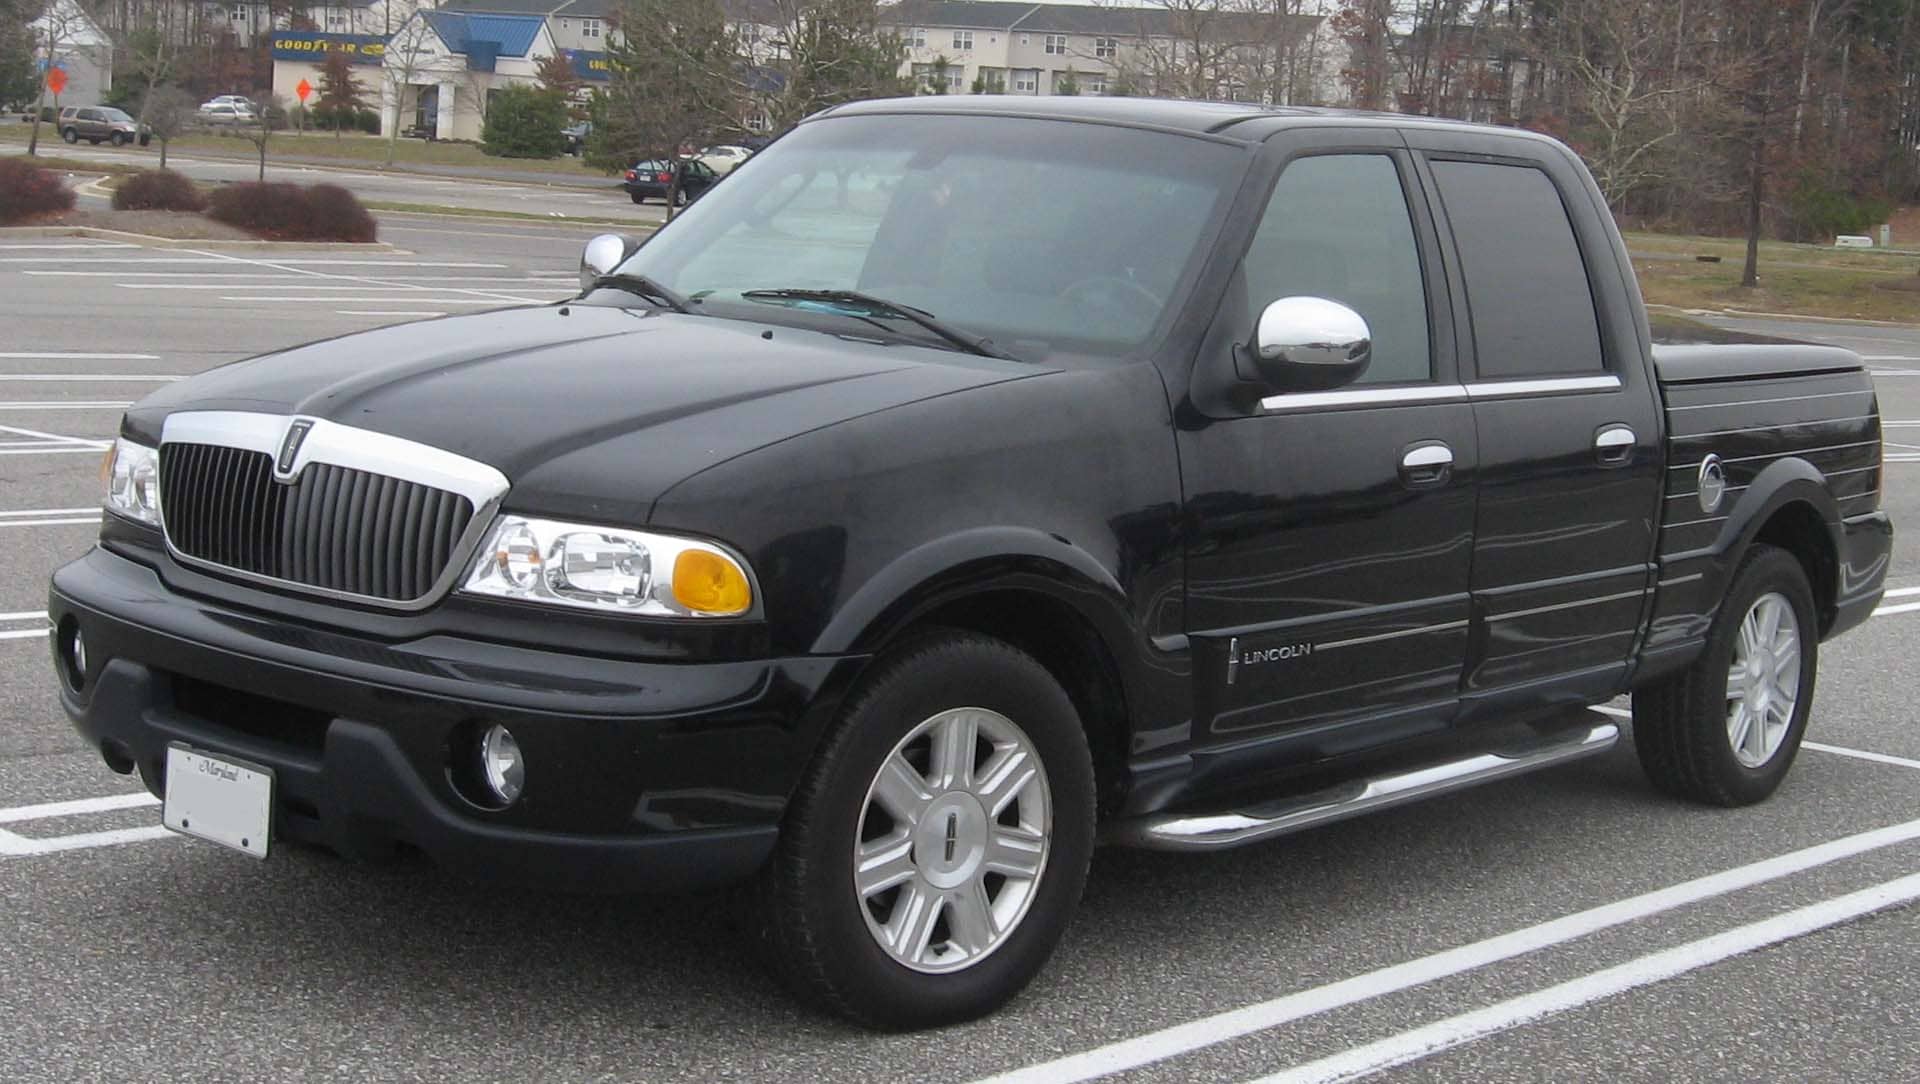 A photograph of a 2002 Lincoln Blackwood truck taken in Waldorf, Maryland